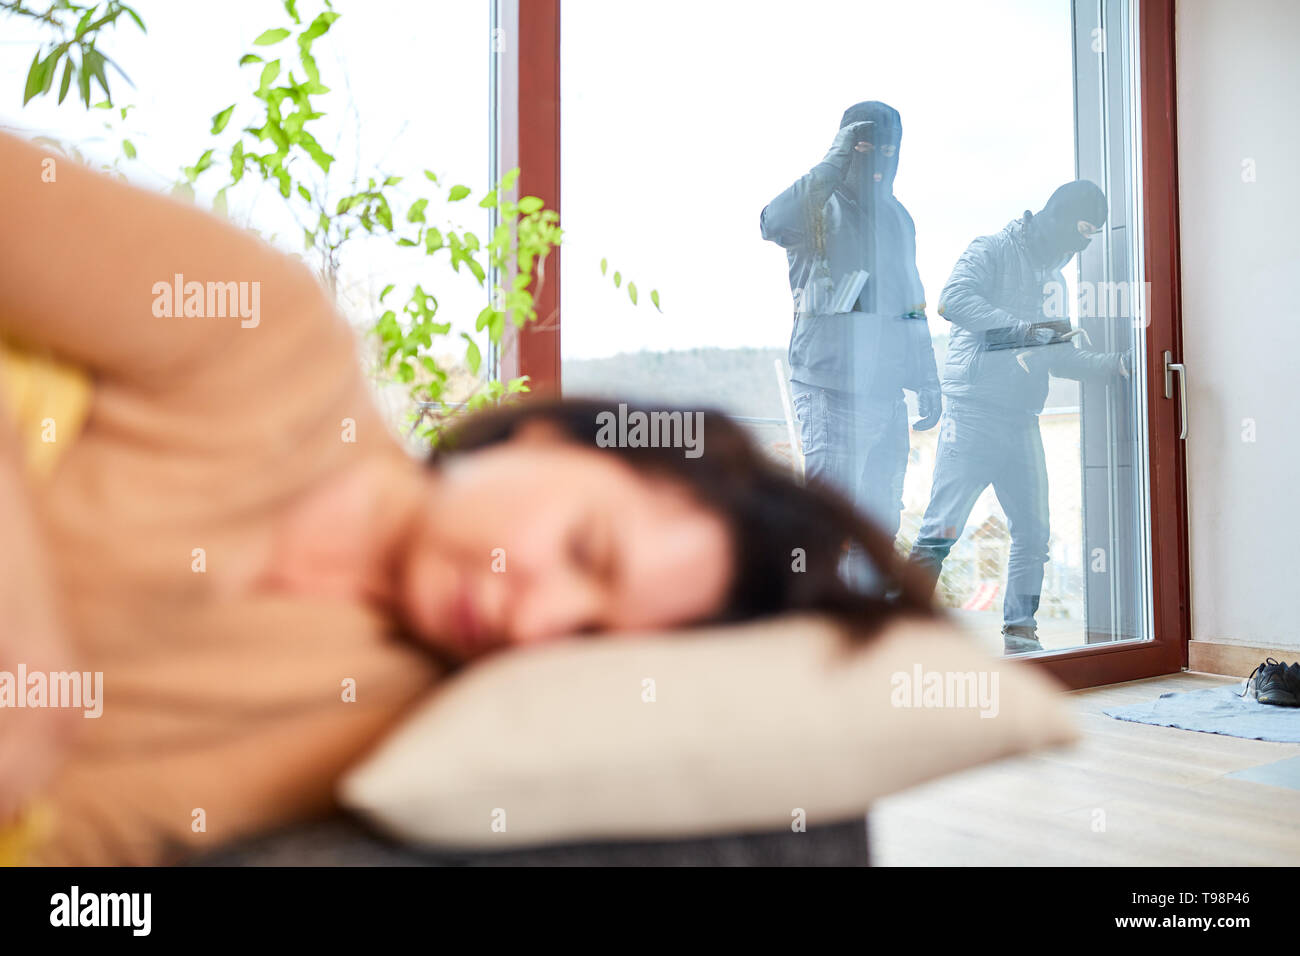 Burglar in robbery with a sleeping woman in the house Stock Photo